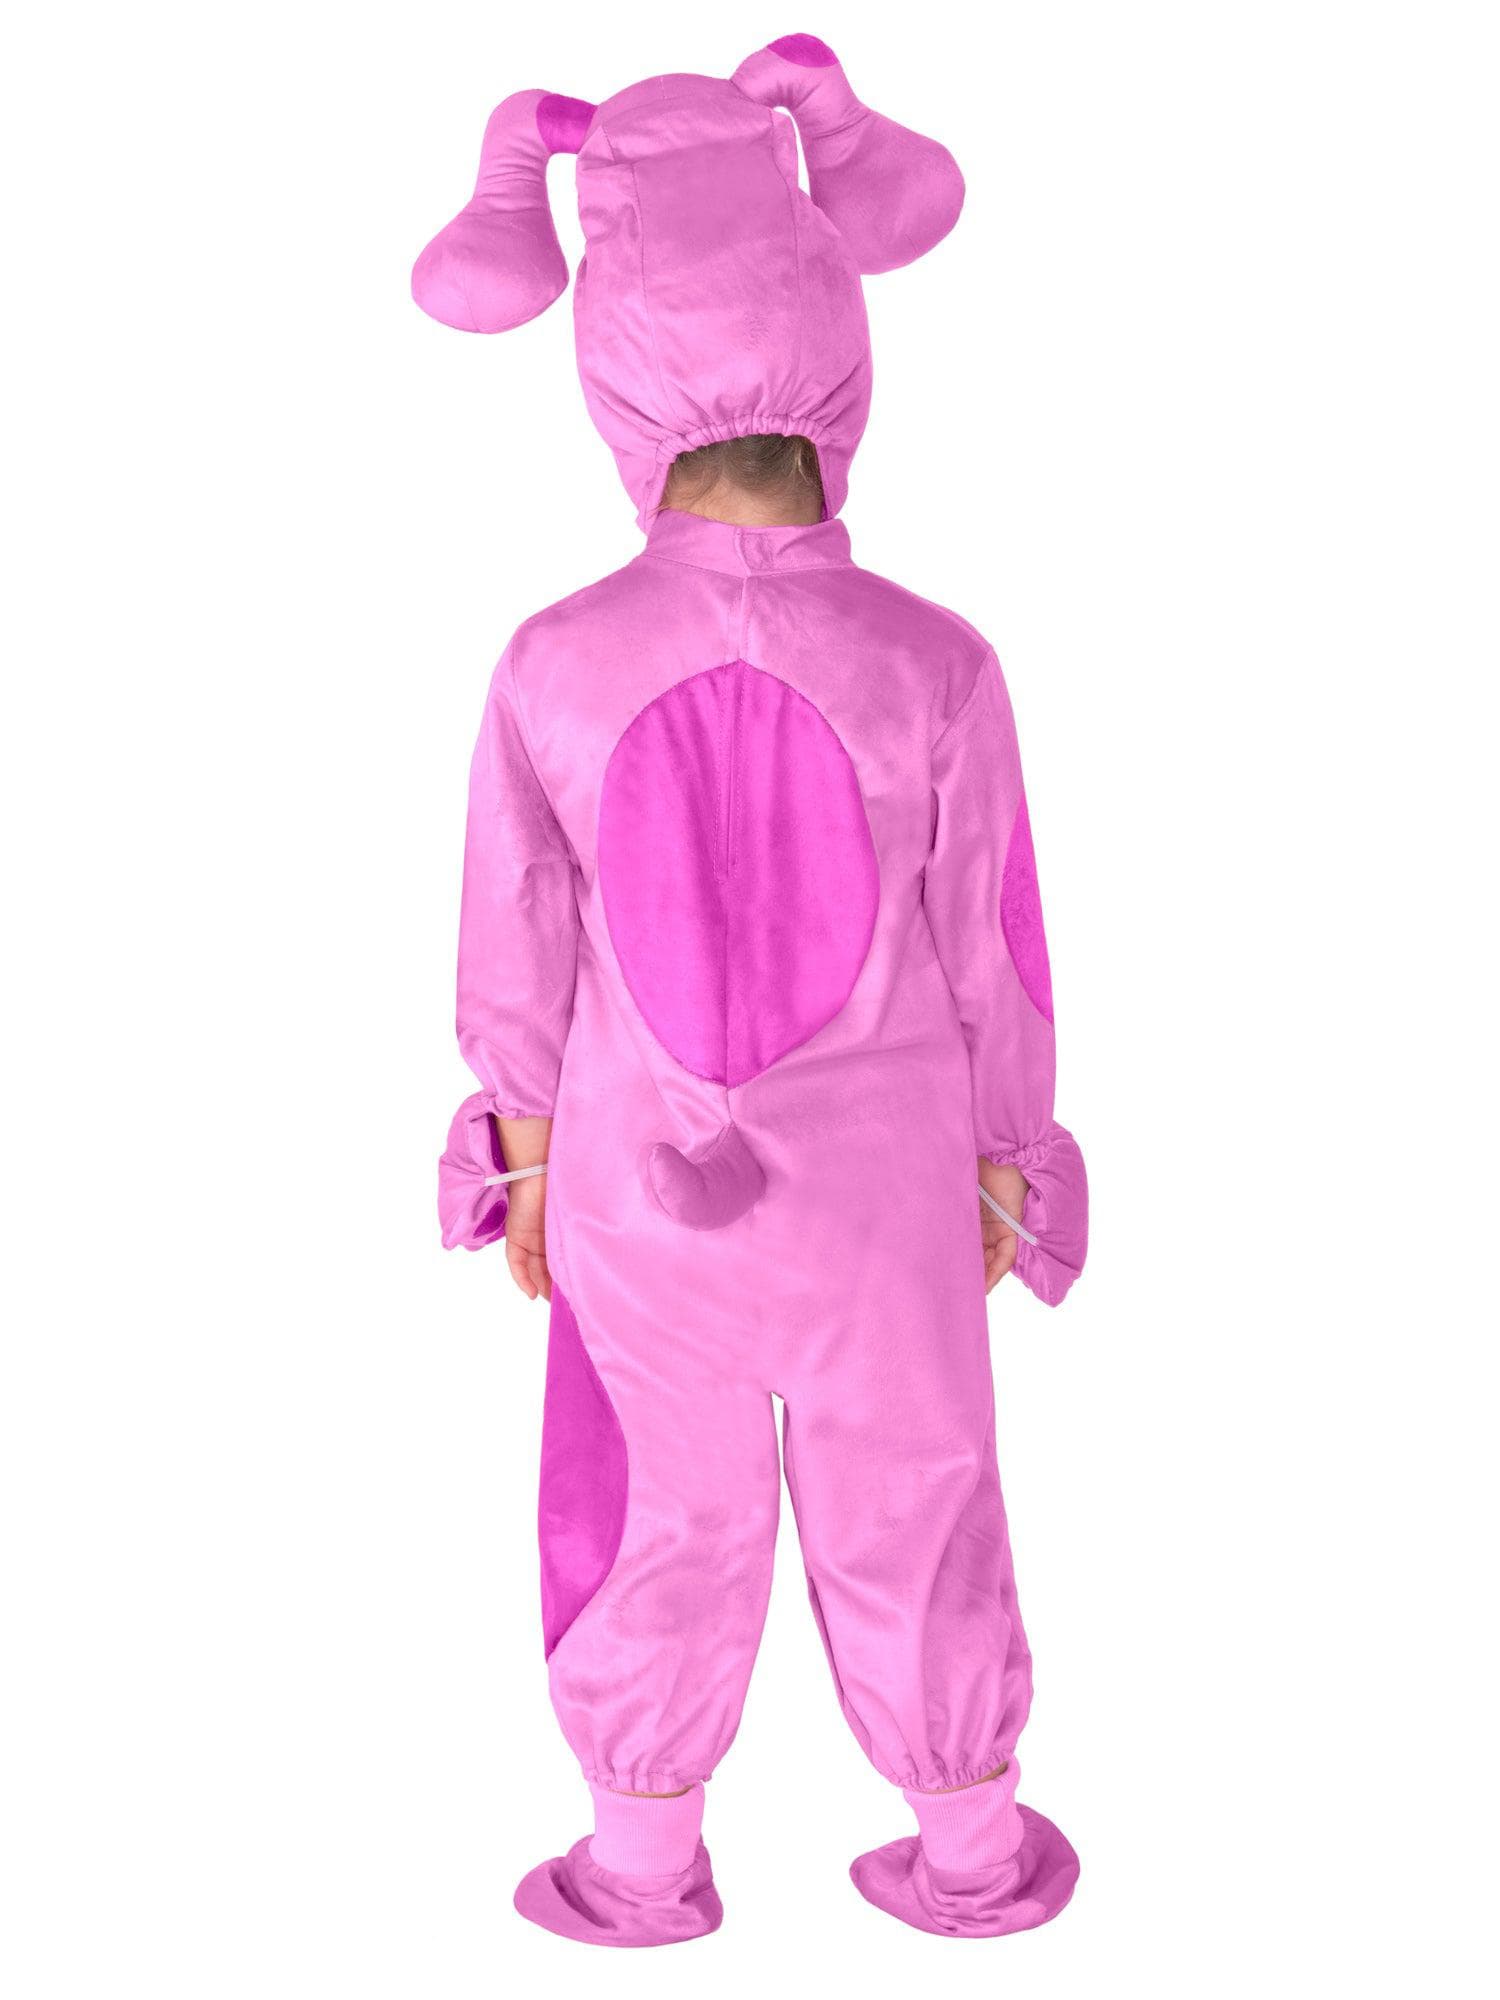 Blue's Clues Magenta Jumpsuit and Headpiece for Toddlers - costumes.com